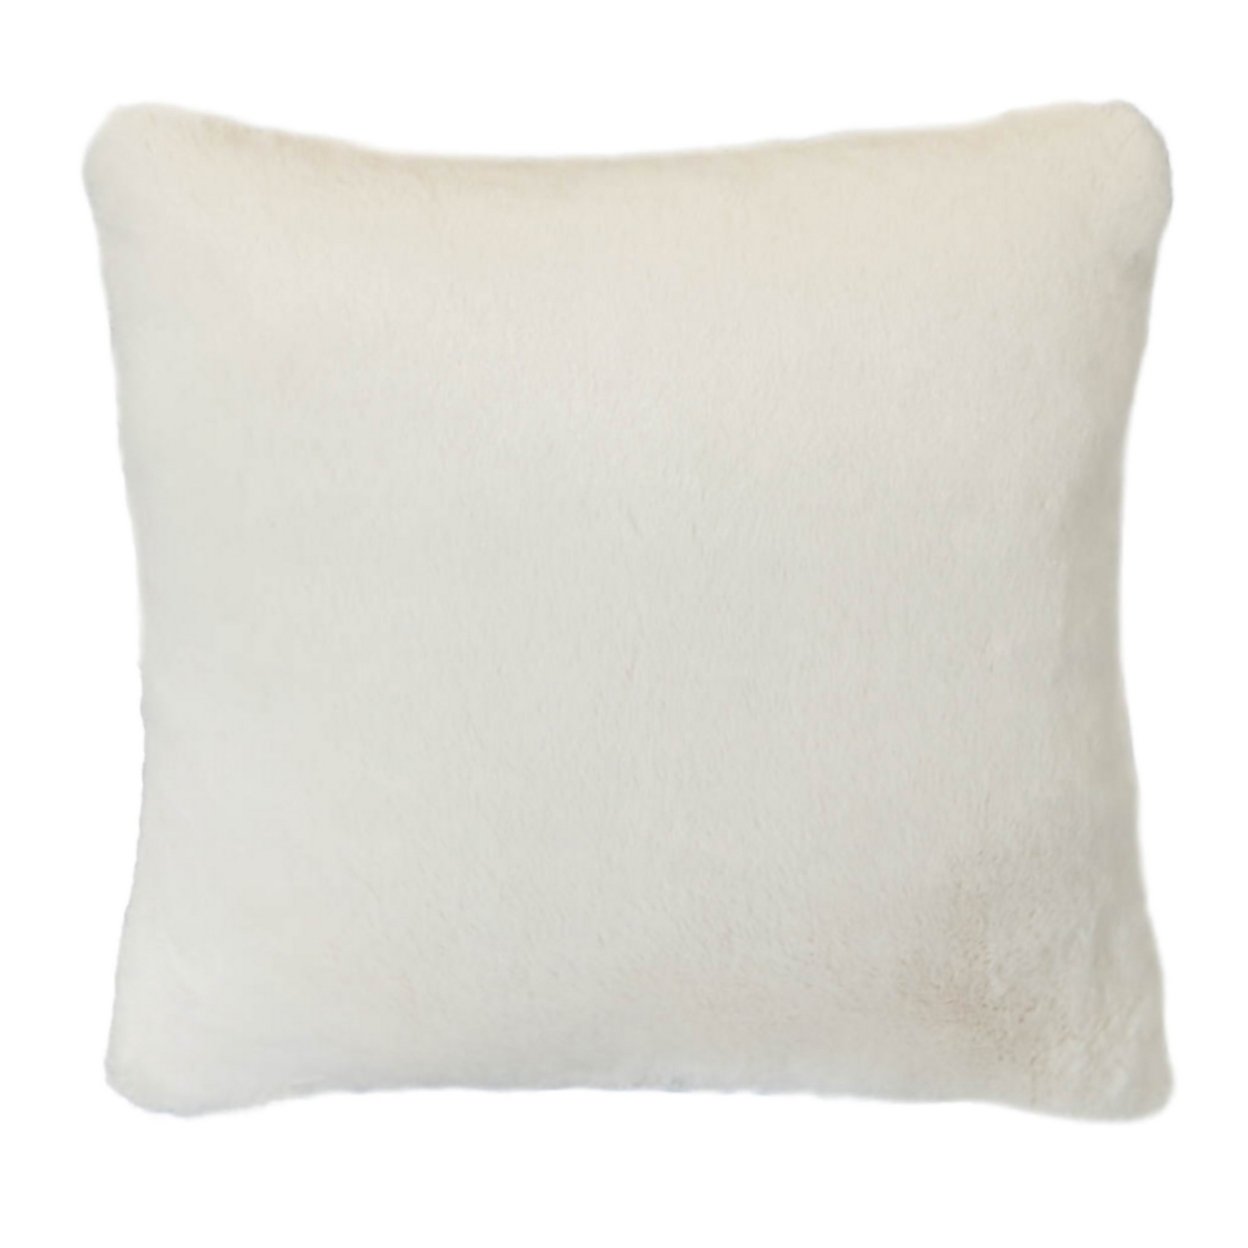 Faux Fur Pillow With Removable Cover And Zipper Closure, Set Of 2, White- Saltoro Sherpi